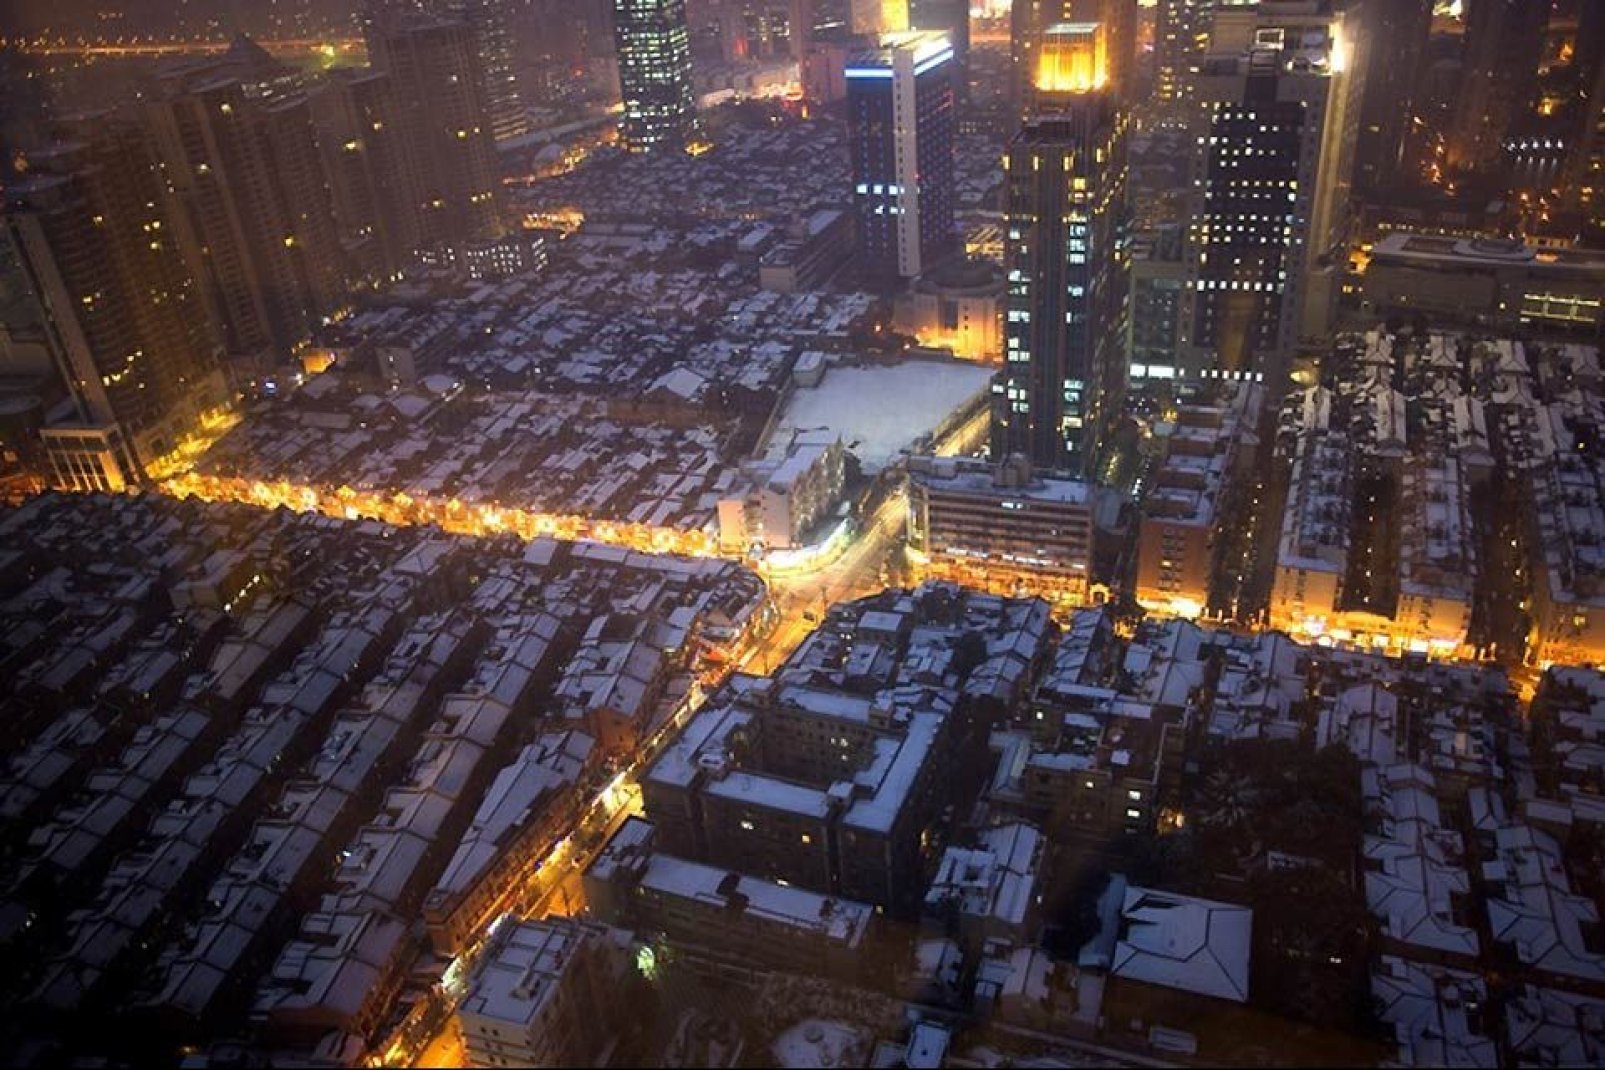 The illuminated streets of Shanghai seen from above.